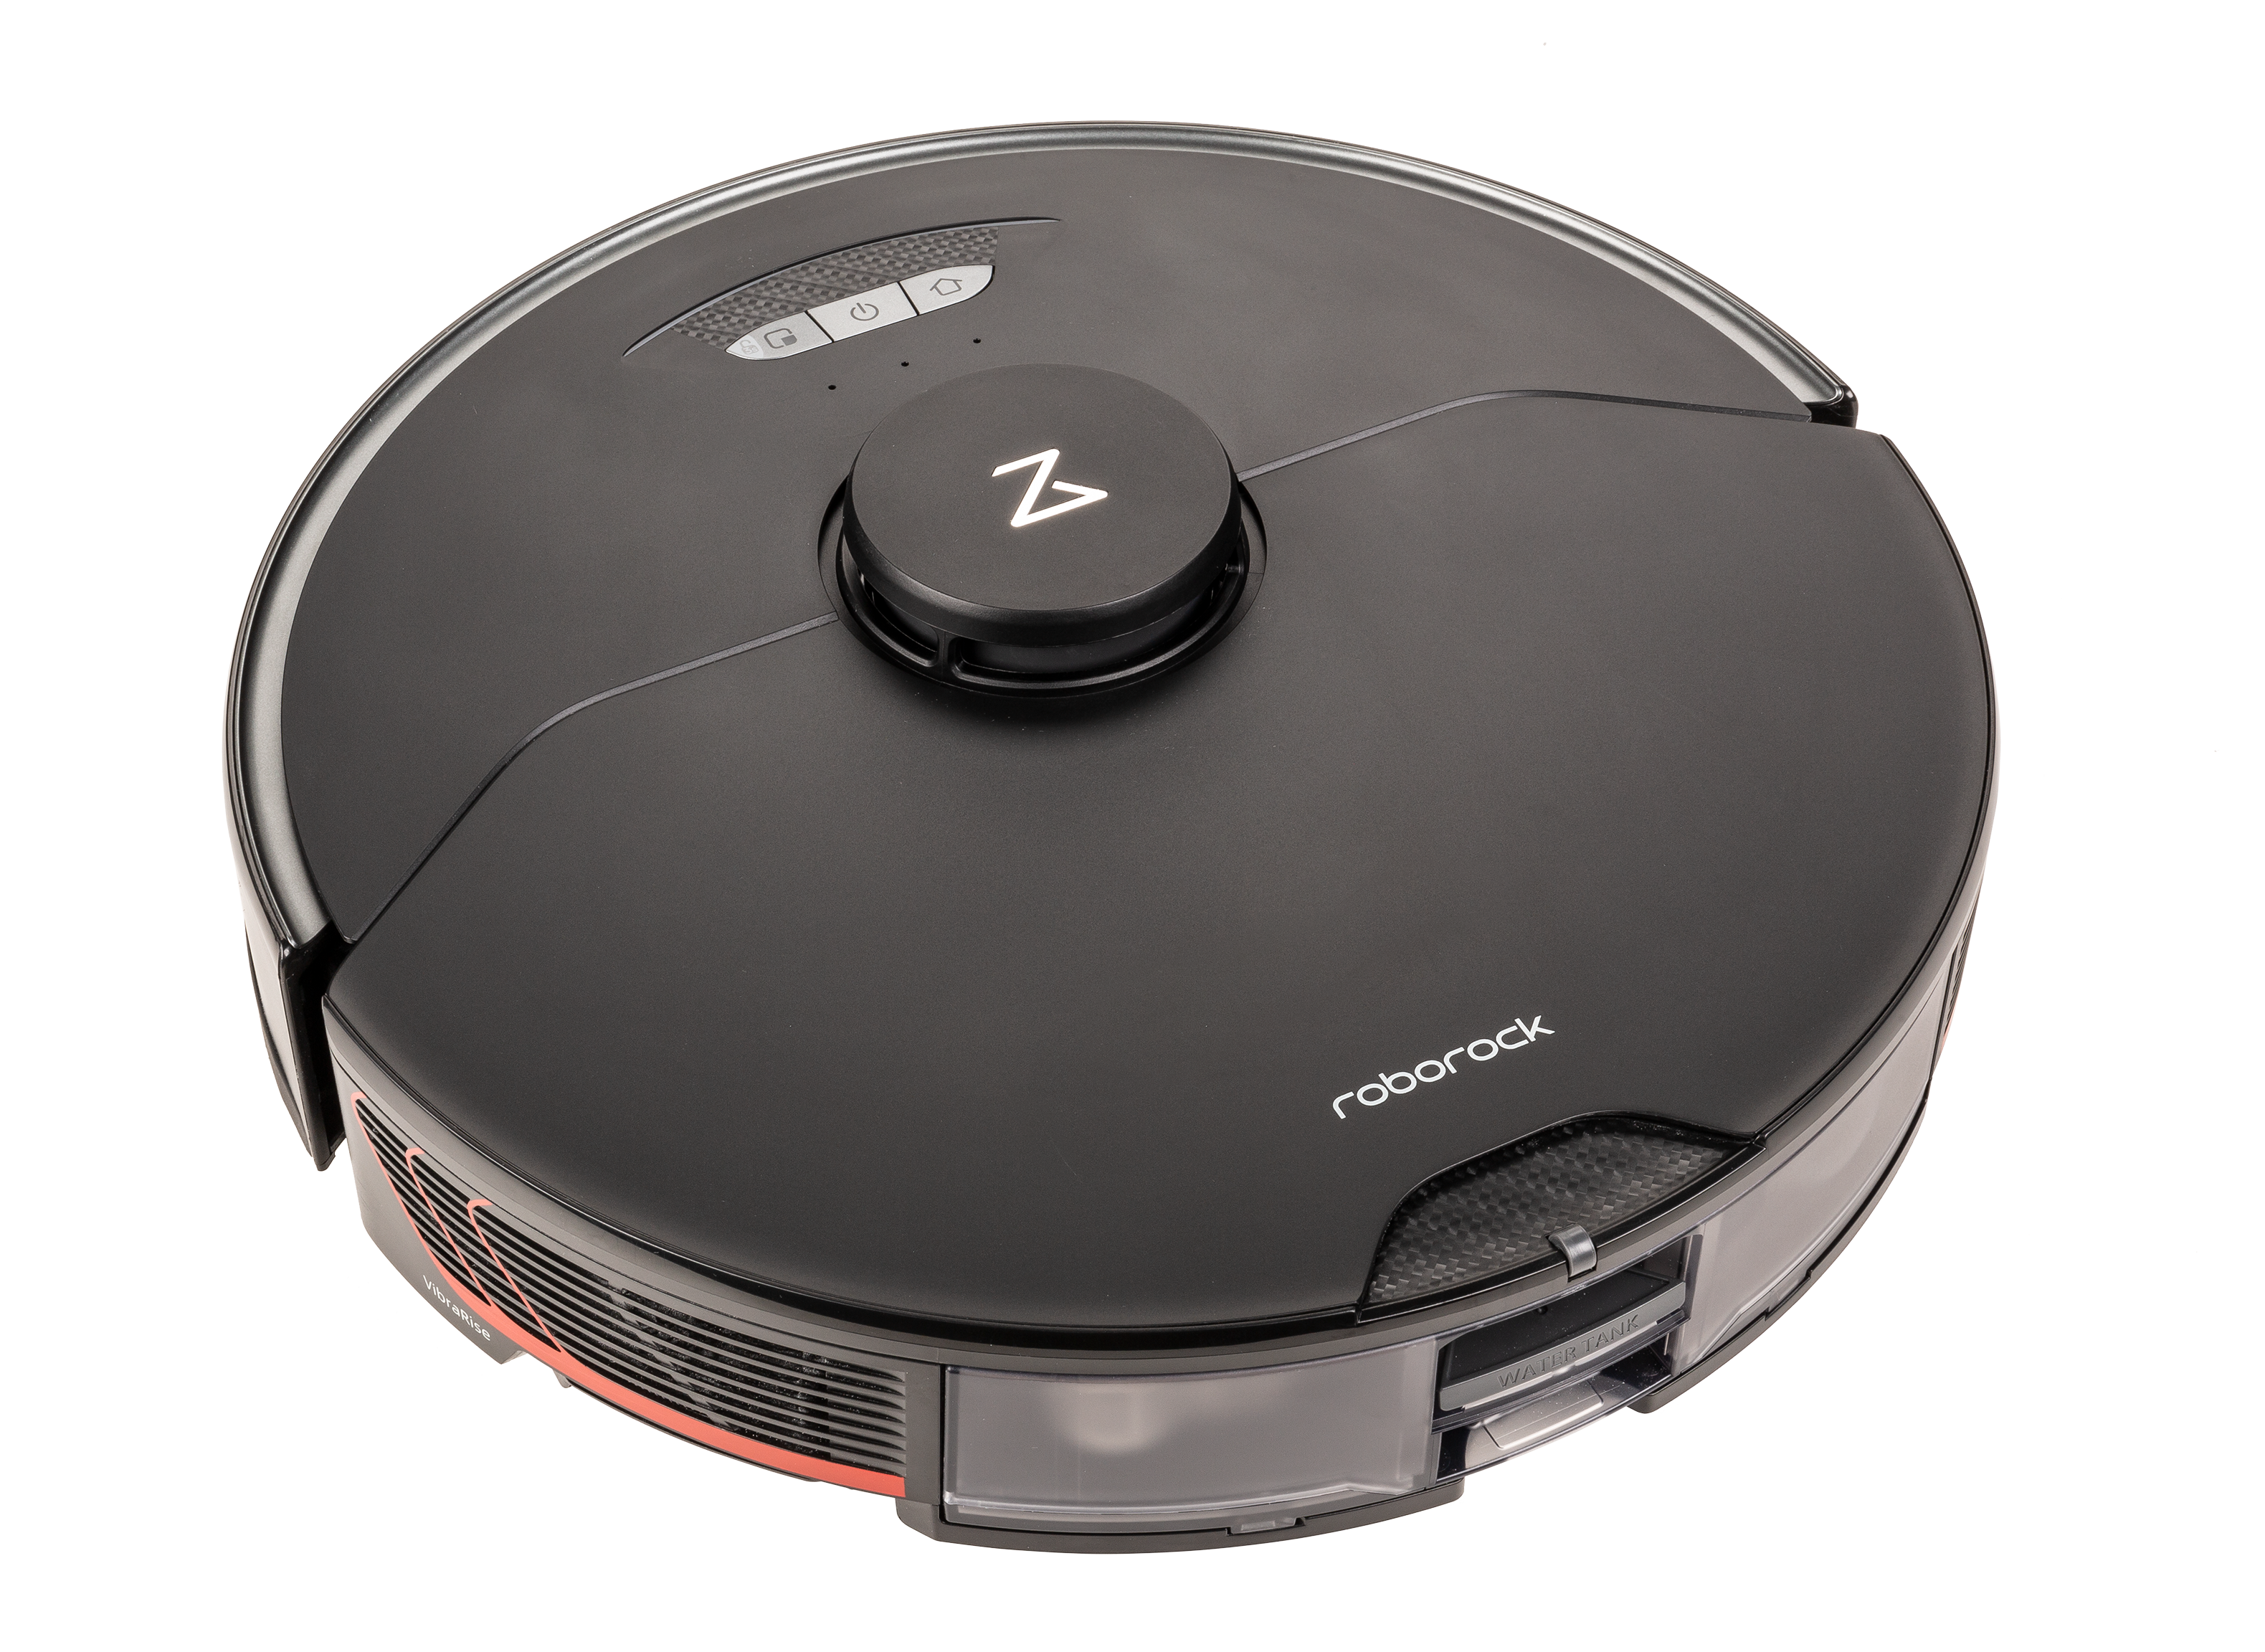 Roborock S7 MaxV Ultra Vacuum Cleaner Review - Consumer Reports